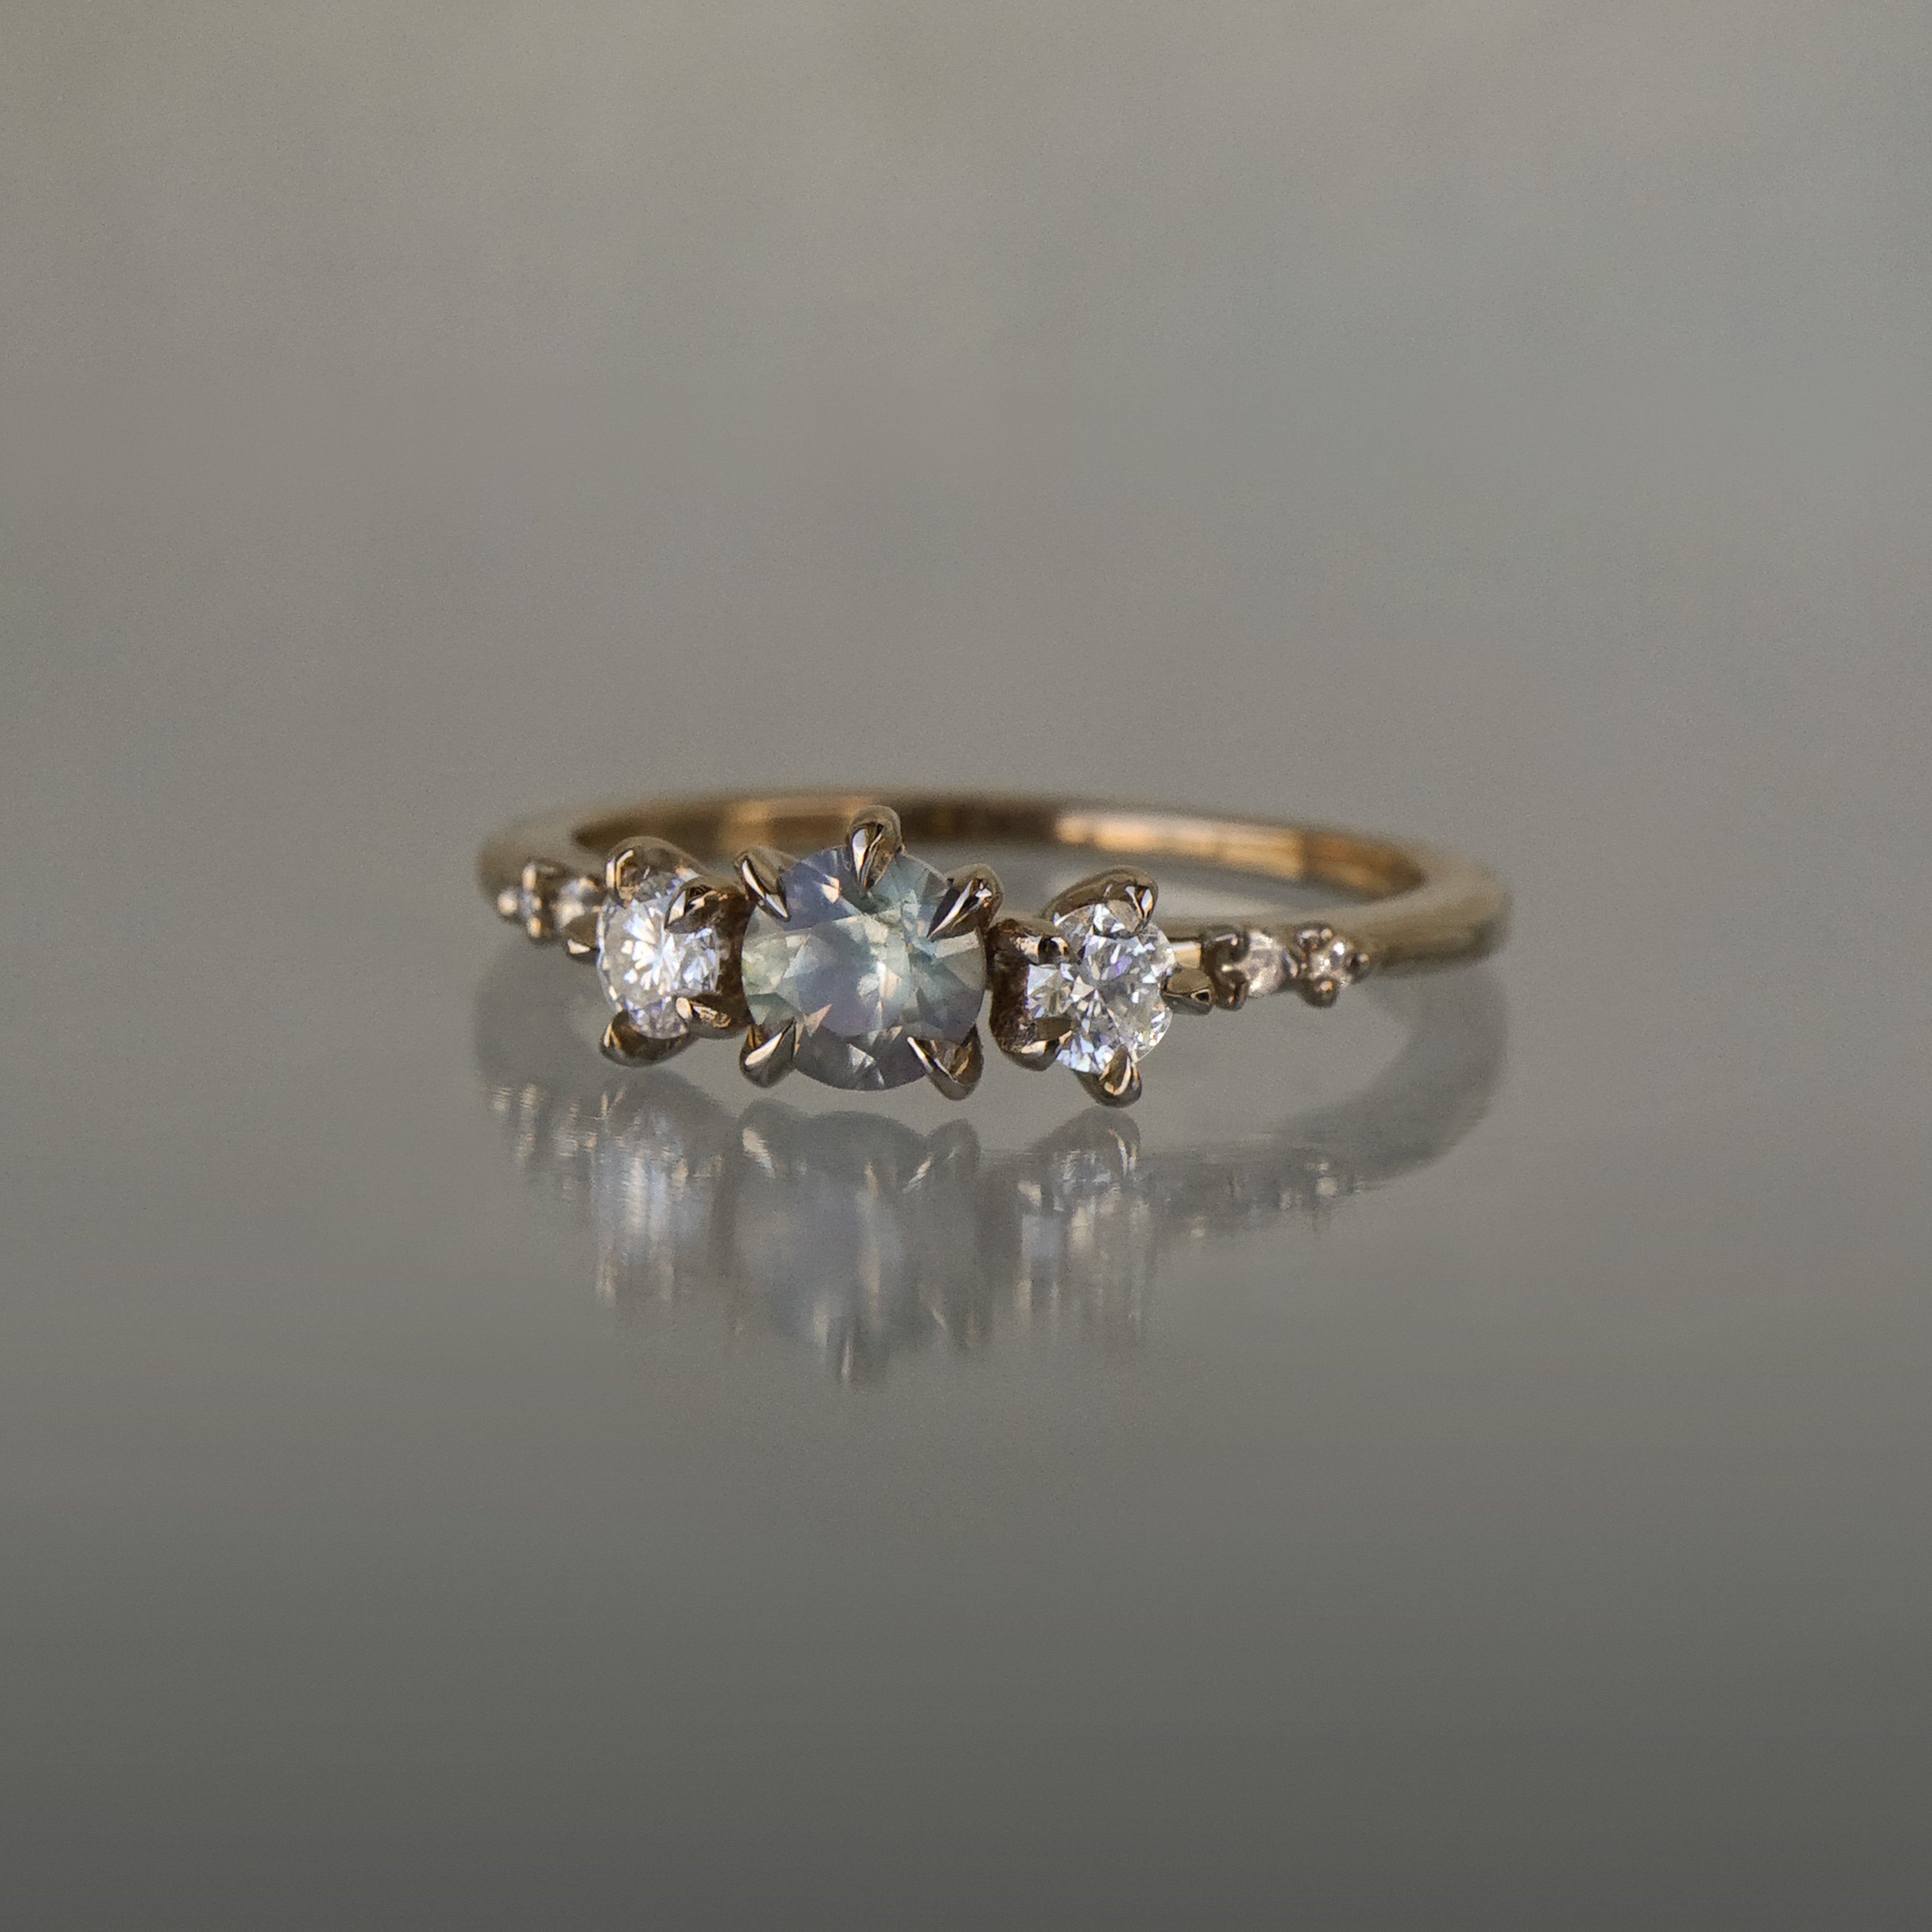 A one of a kind "Wild Iris" style engagement ring by Laurie Fleming Jewellery featuring a colour-change sapphire centre with shifting hues of blue, grey, blush, and green, flanked by a diamond on either side. Additional diamonds drip down the band. The ring is handcarved and made in solid champagne yellow gold, and is situated on a medium grey background.